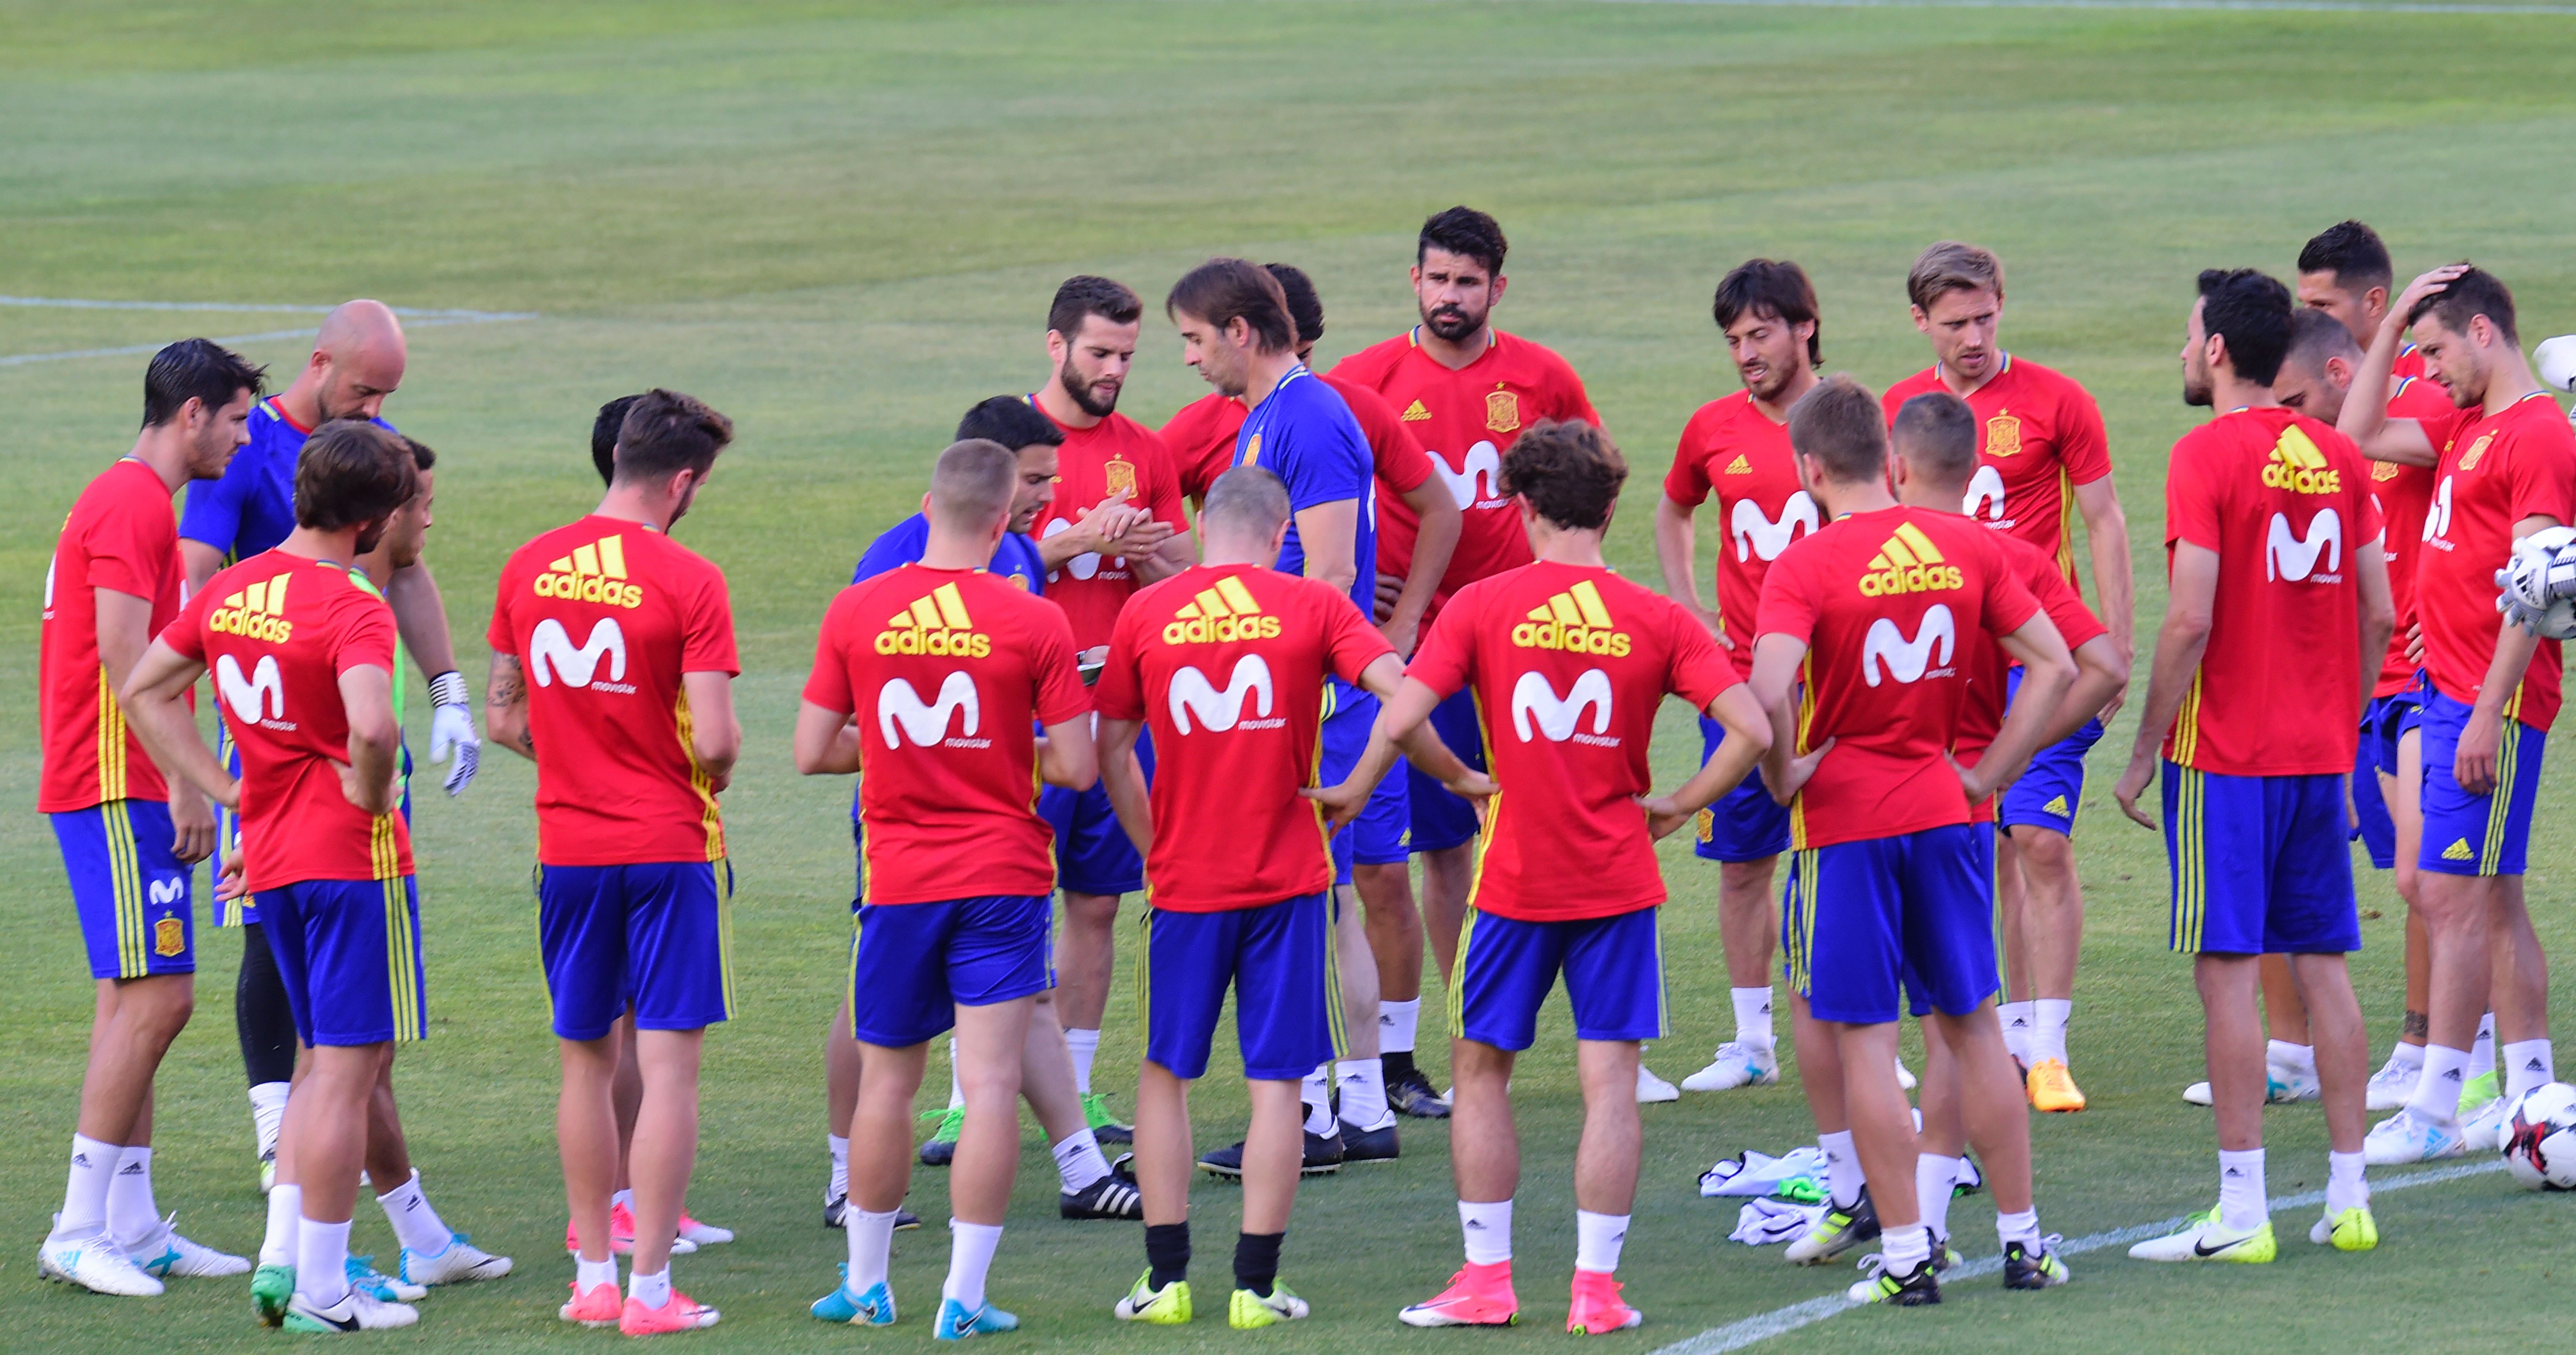 Spain's coach Julen Lopetegui (C) speaks to his players during the training session at the New Condomina stadium in Murcia on June 6, 2017 on the eve of their friendly match against Colombia. / AFP PHOTO / JOSE JORDAN        (Photo credit should read JOSE JORDAN/AFP/Getty Images)